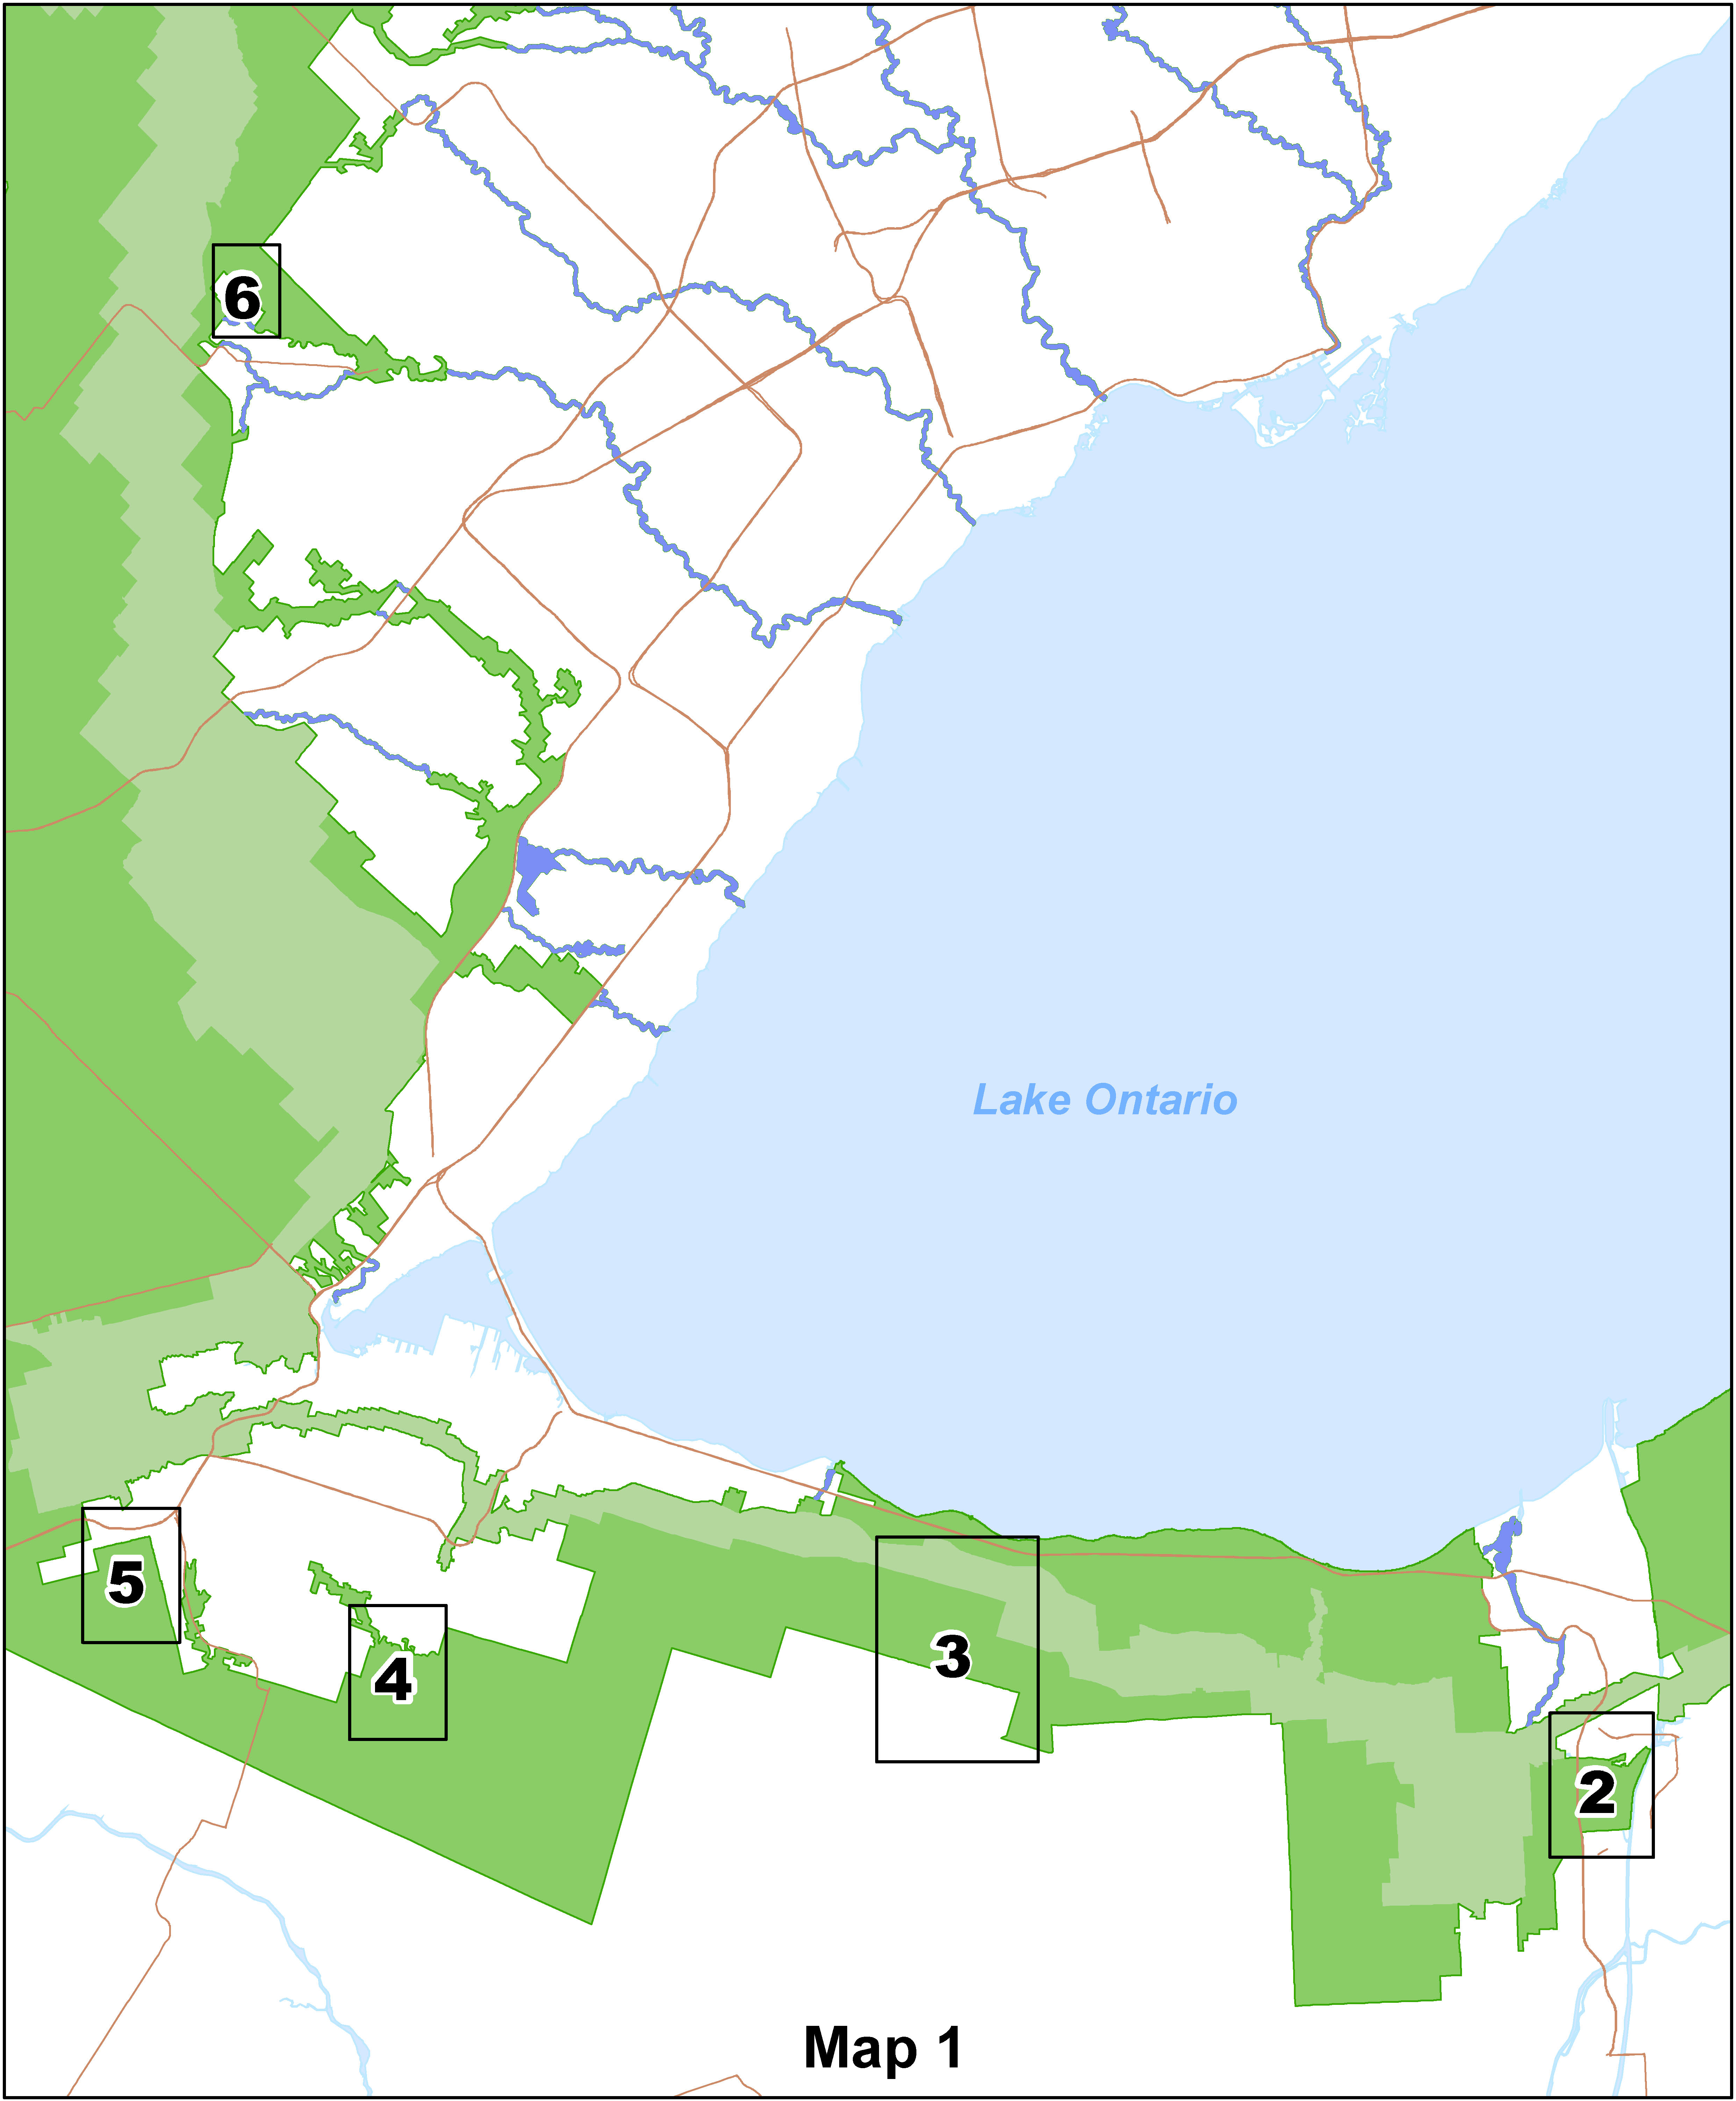 A key map detailing additions to the Protected Countryside separated into 5 smaller areas.